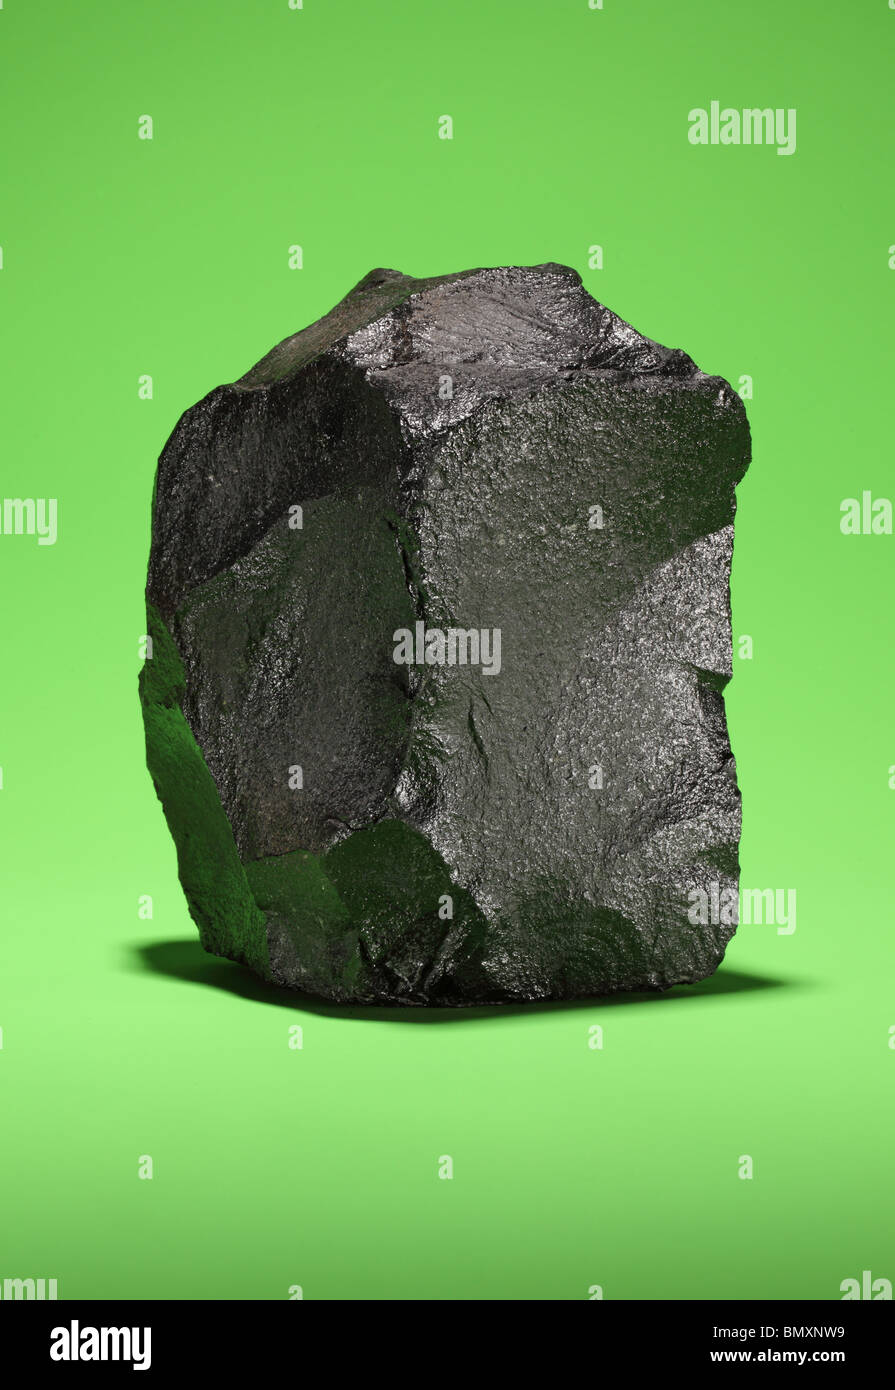 A large piece of black bituminous coal on a bright green background Stock Photo